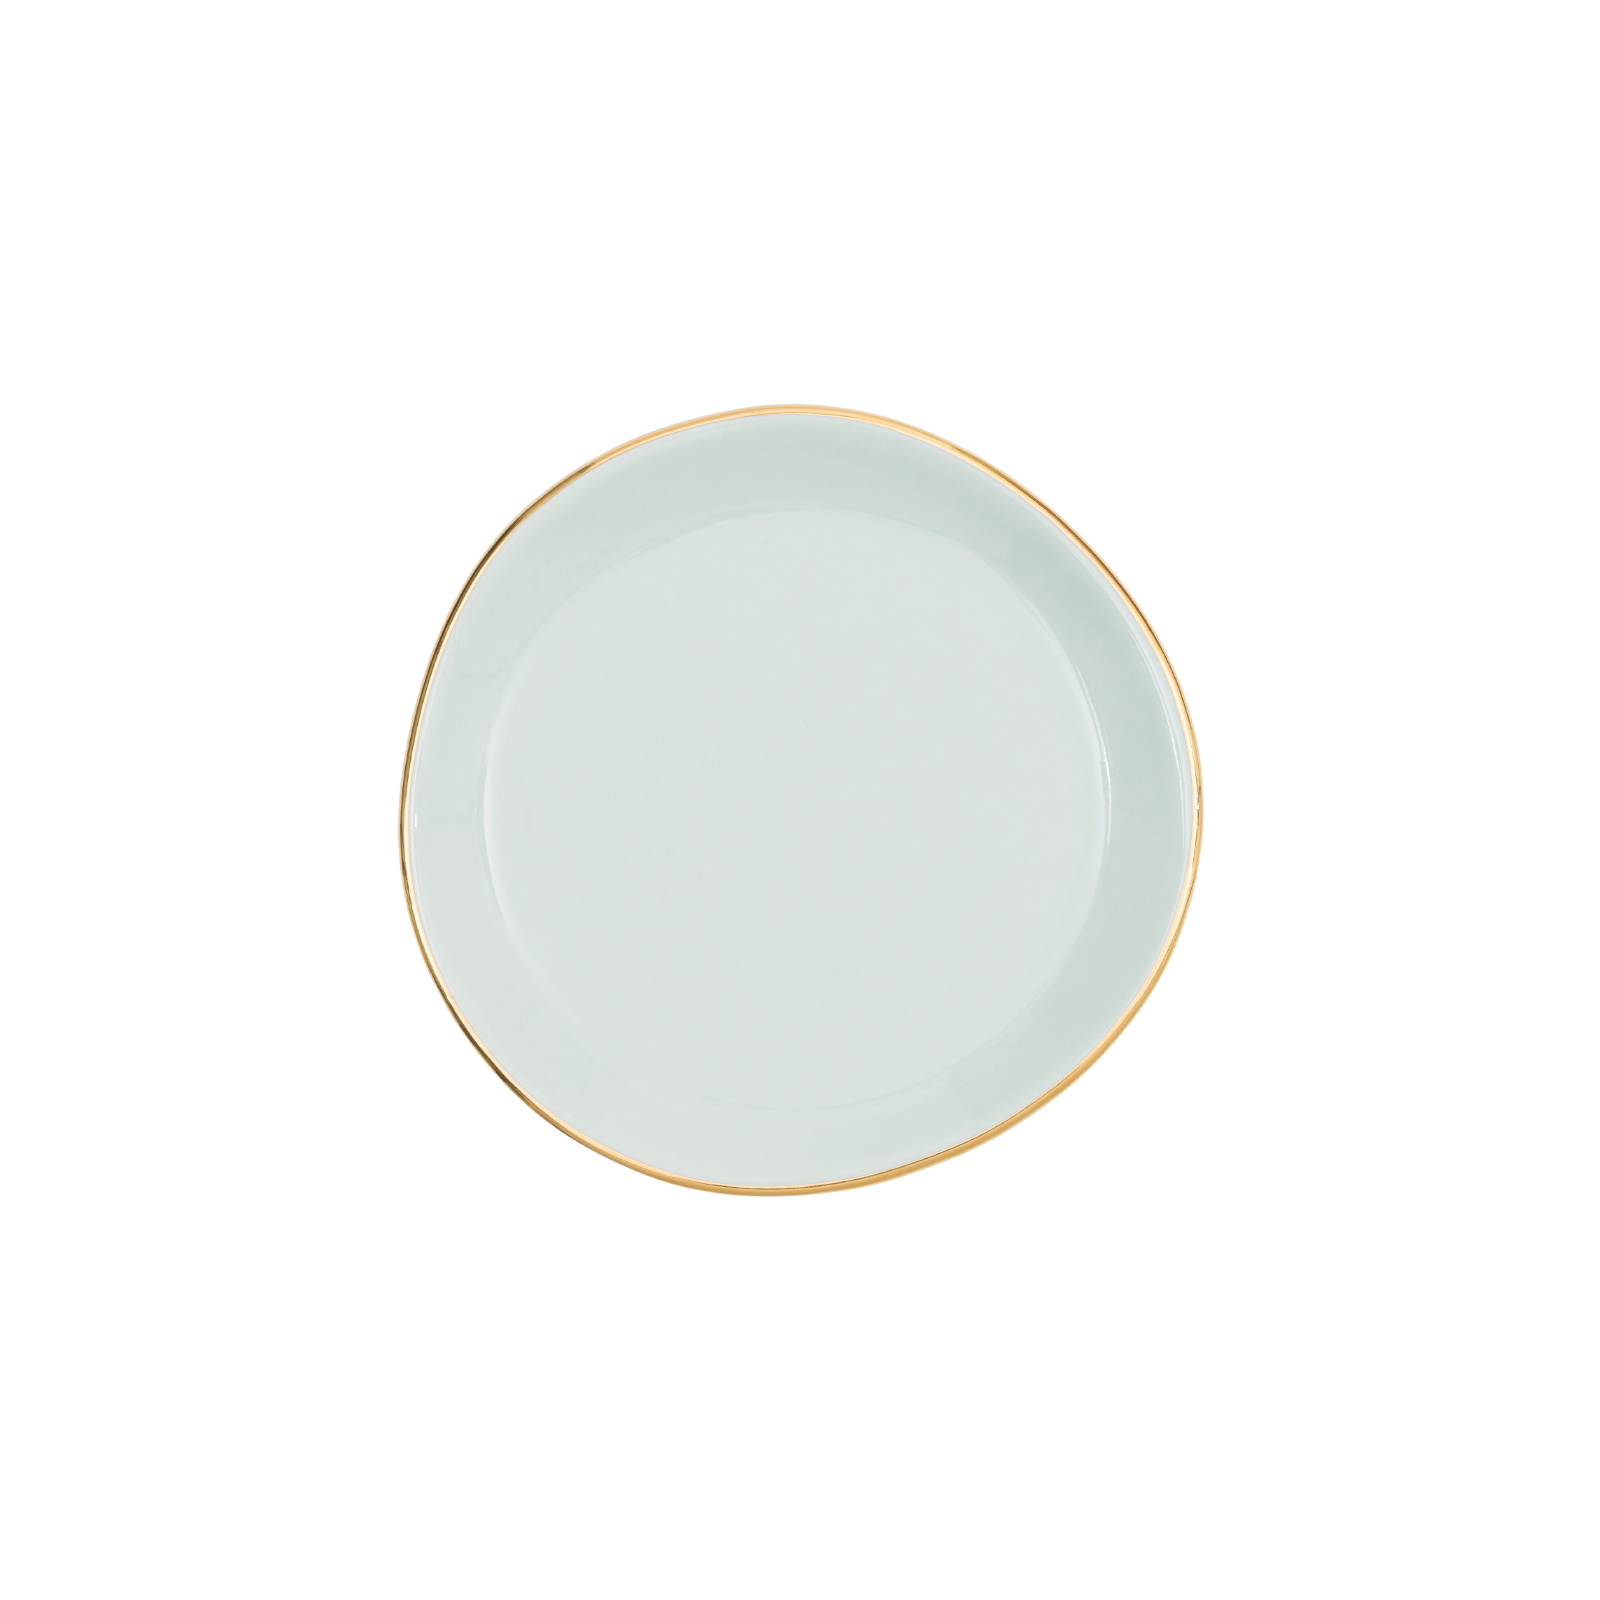 Urban Nature Culture Small Celadon Good Morning Plate - Set of 2